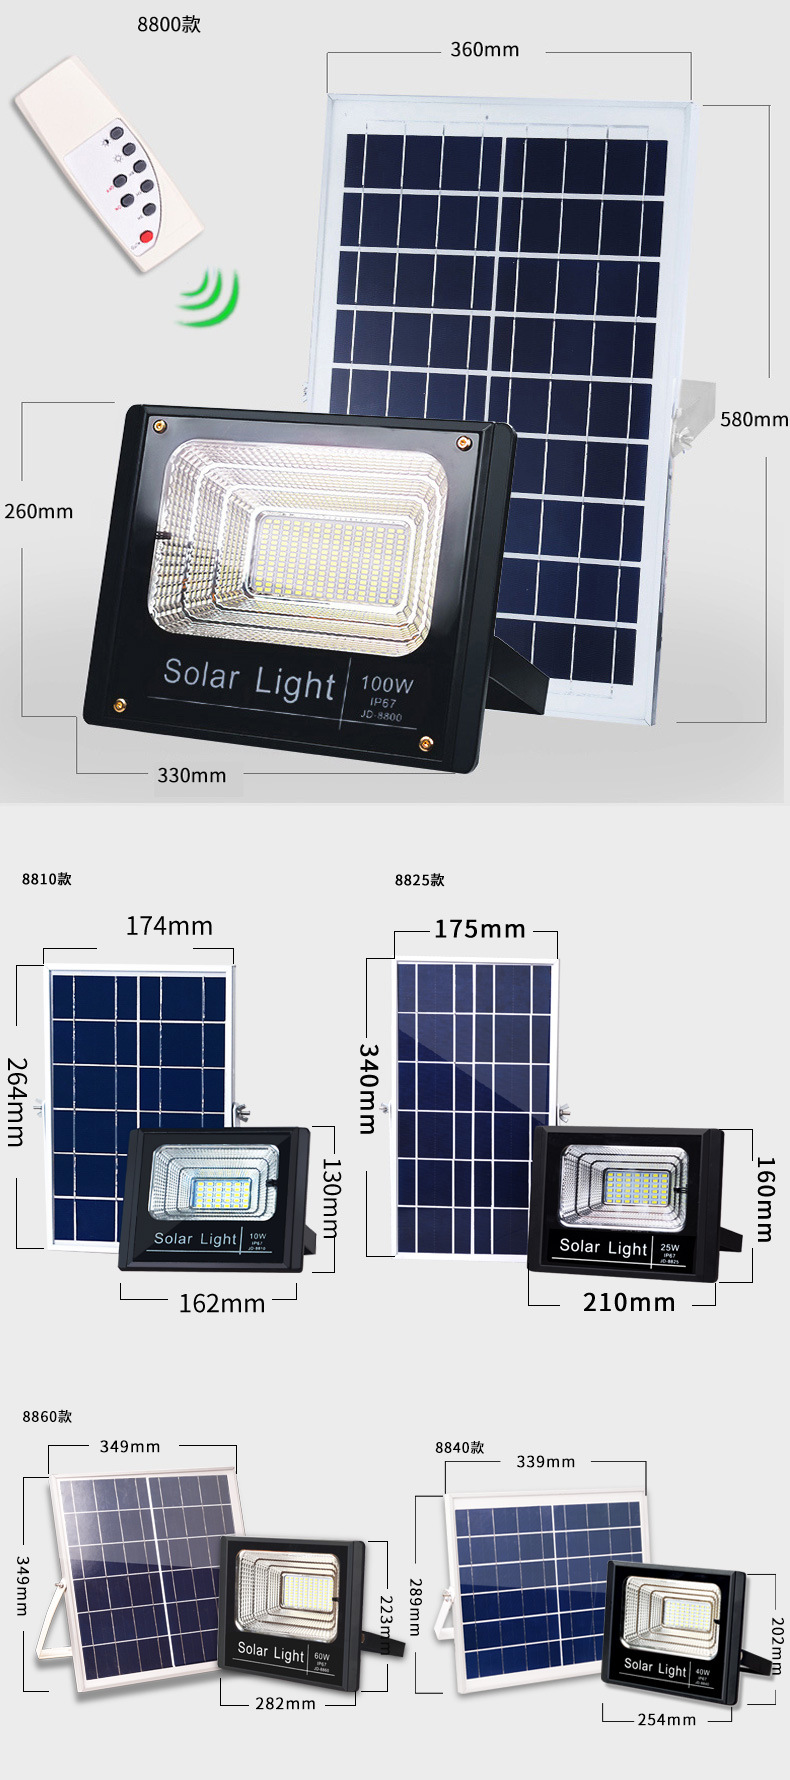 2020 Globalsunrise Solar Flood Light 25W 40W with Remote Control Lithium Battery